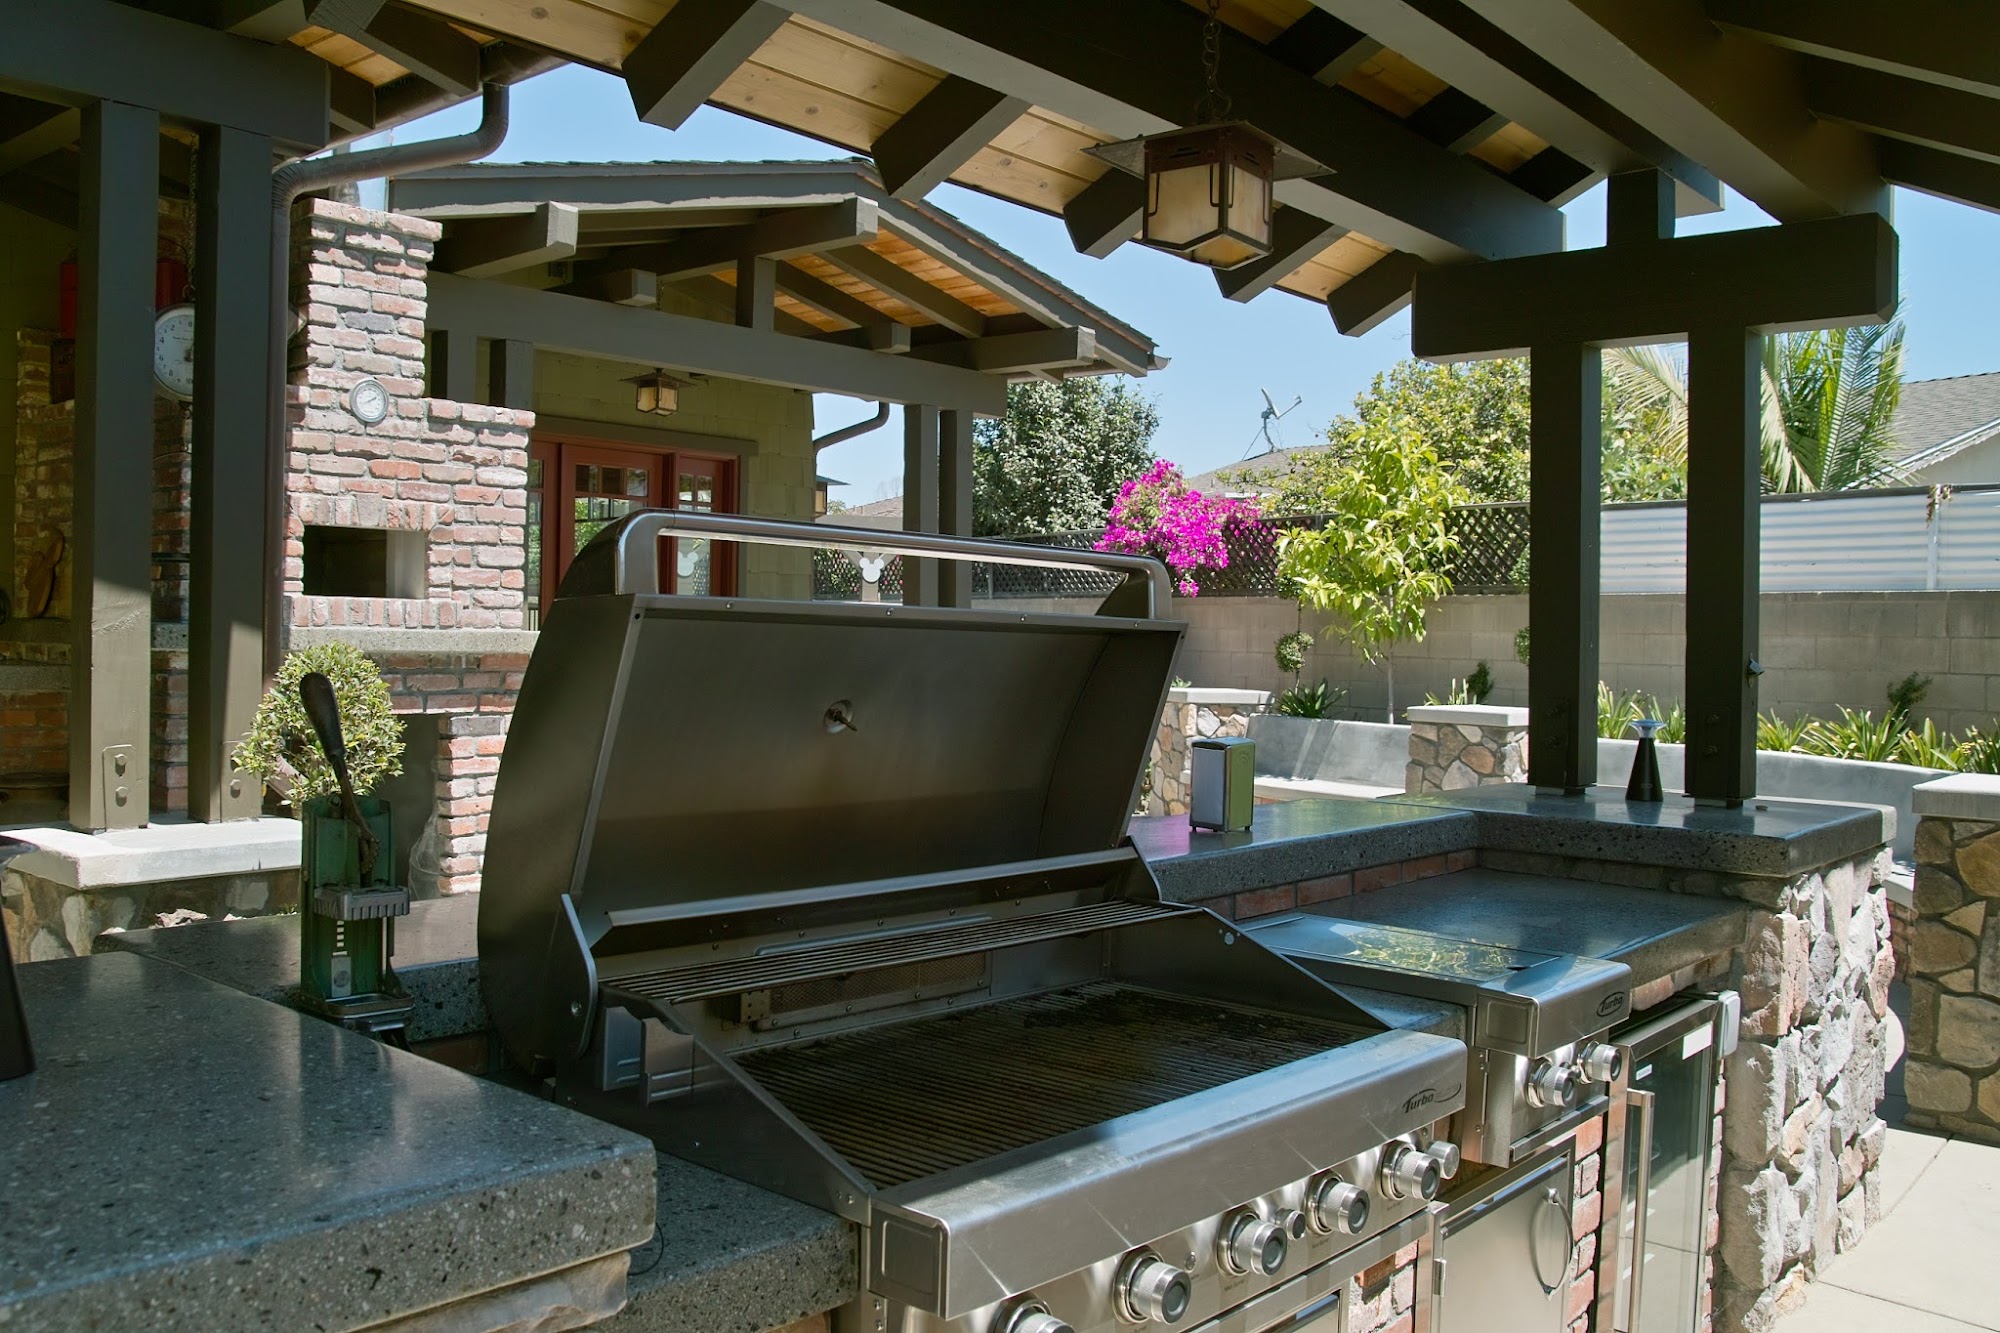 Fogazzo Wood Fired Ovens and Barbecues